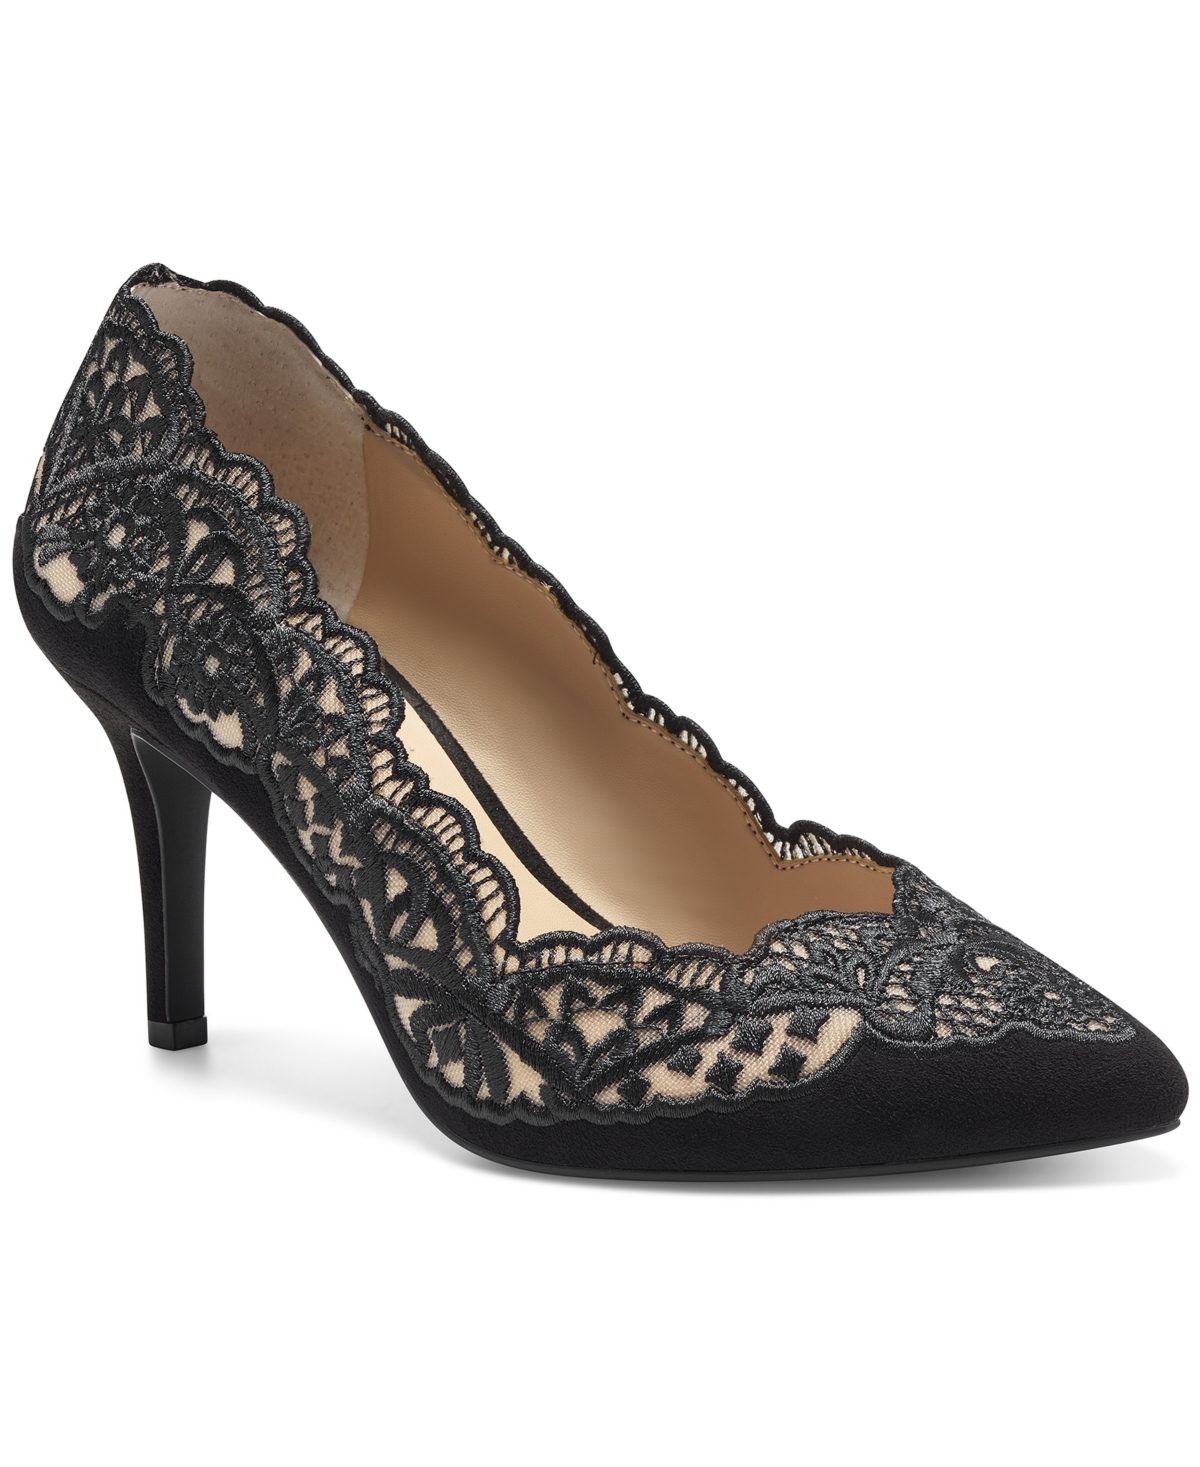 Women's Zitah Pointed Toe Pumps, Created for Macy's - Black Lace